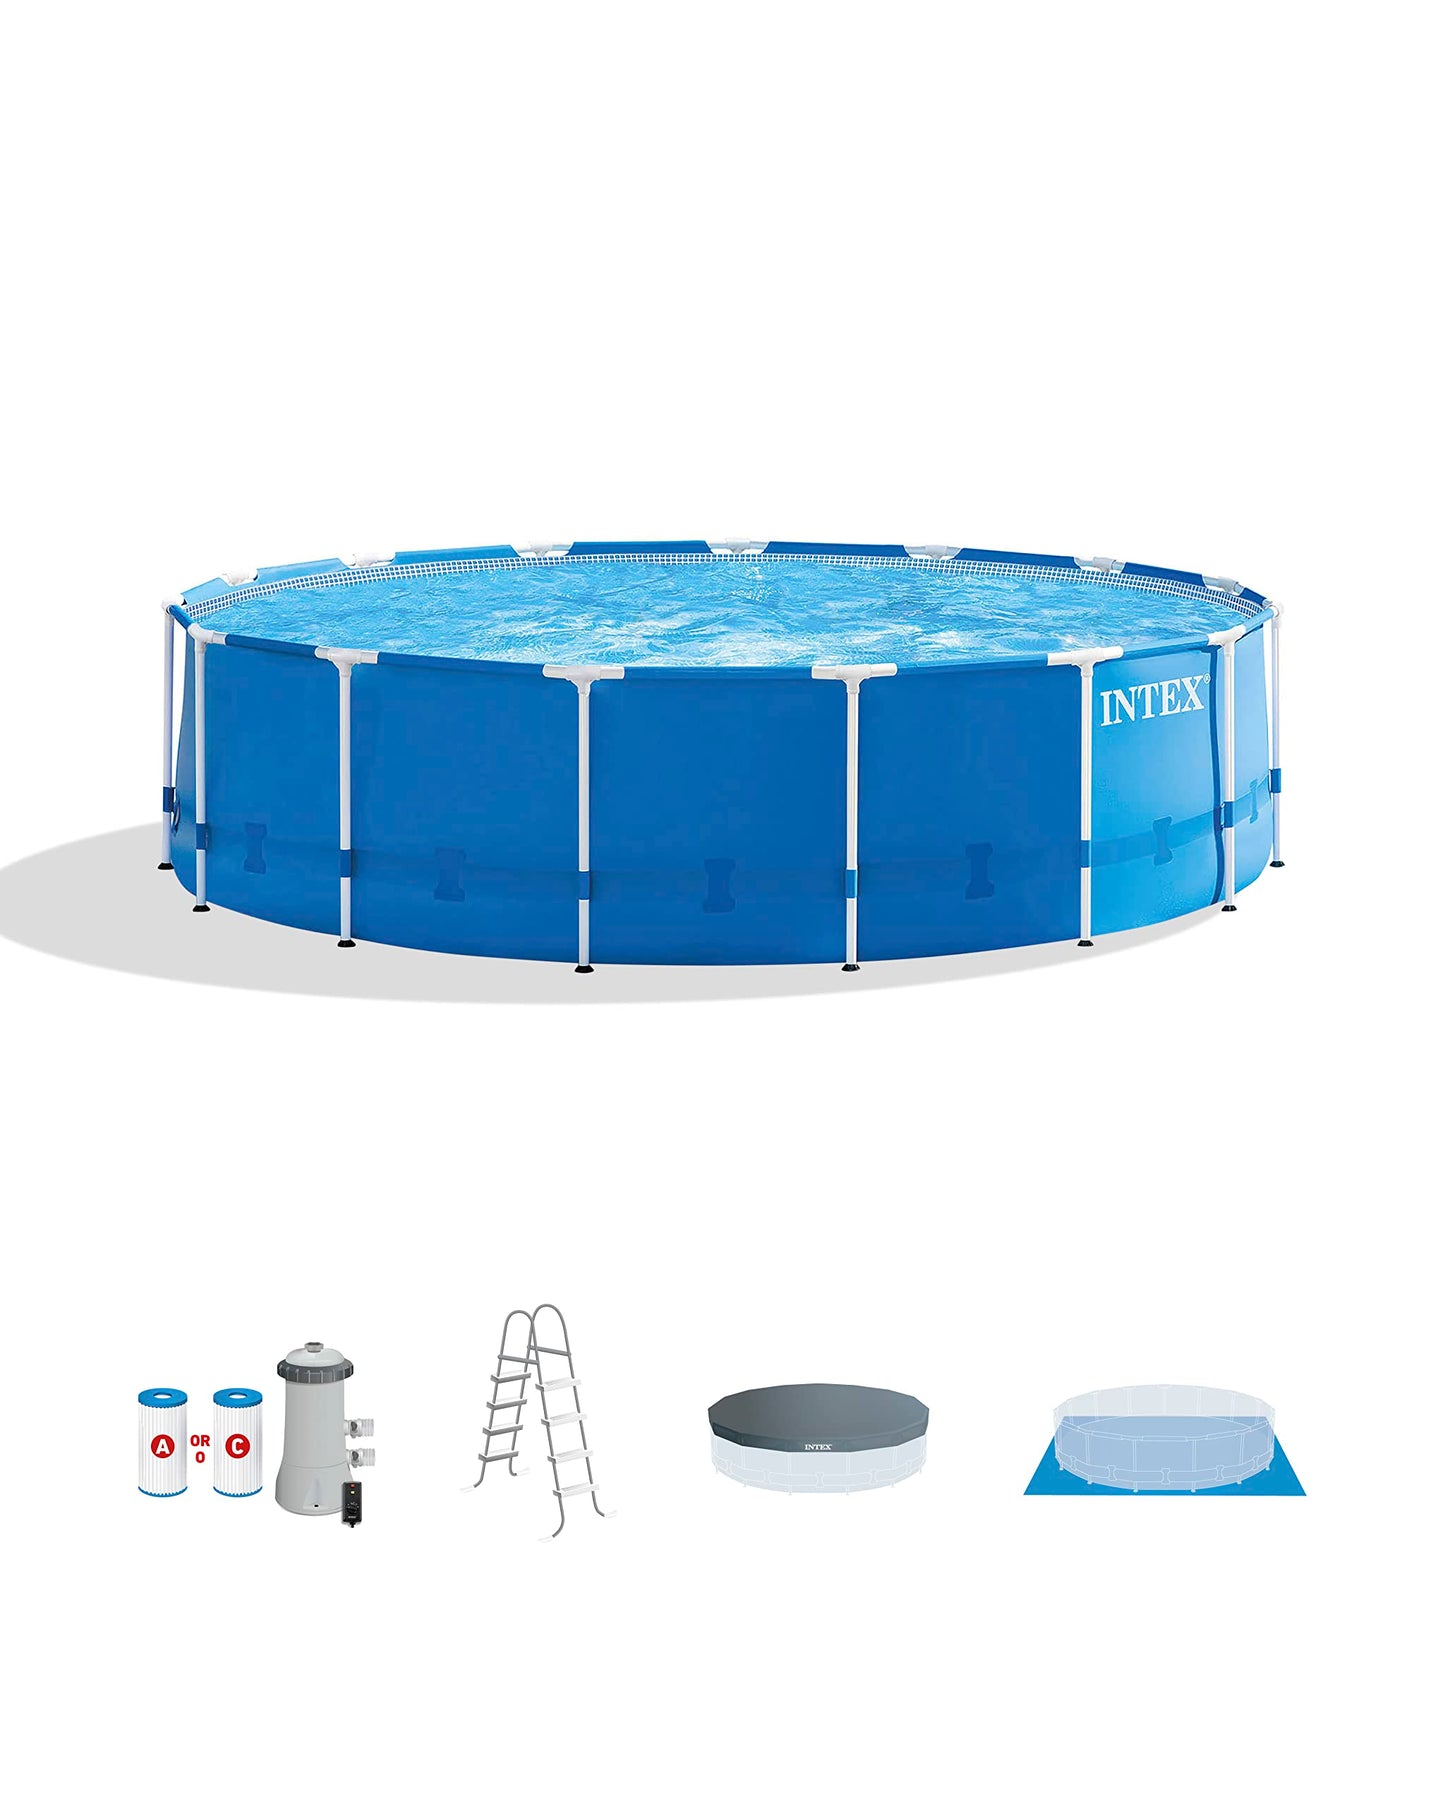 INTEX 28241EH Metal Frame Above Ground Swimming Pool Set: 15ft x 48in – Includes 1000 GPH Cartridge Filter Pump – Removable Ladder – Pool Cover – Ground Cloth Metal Frame Pool